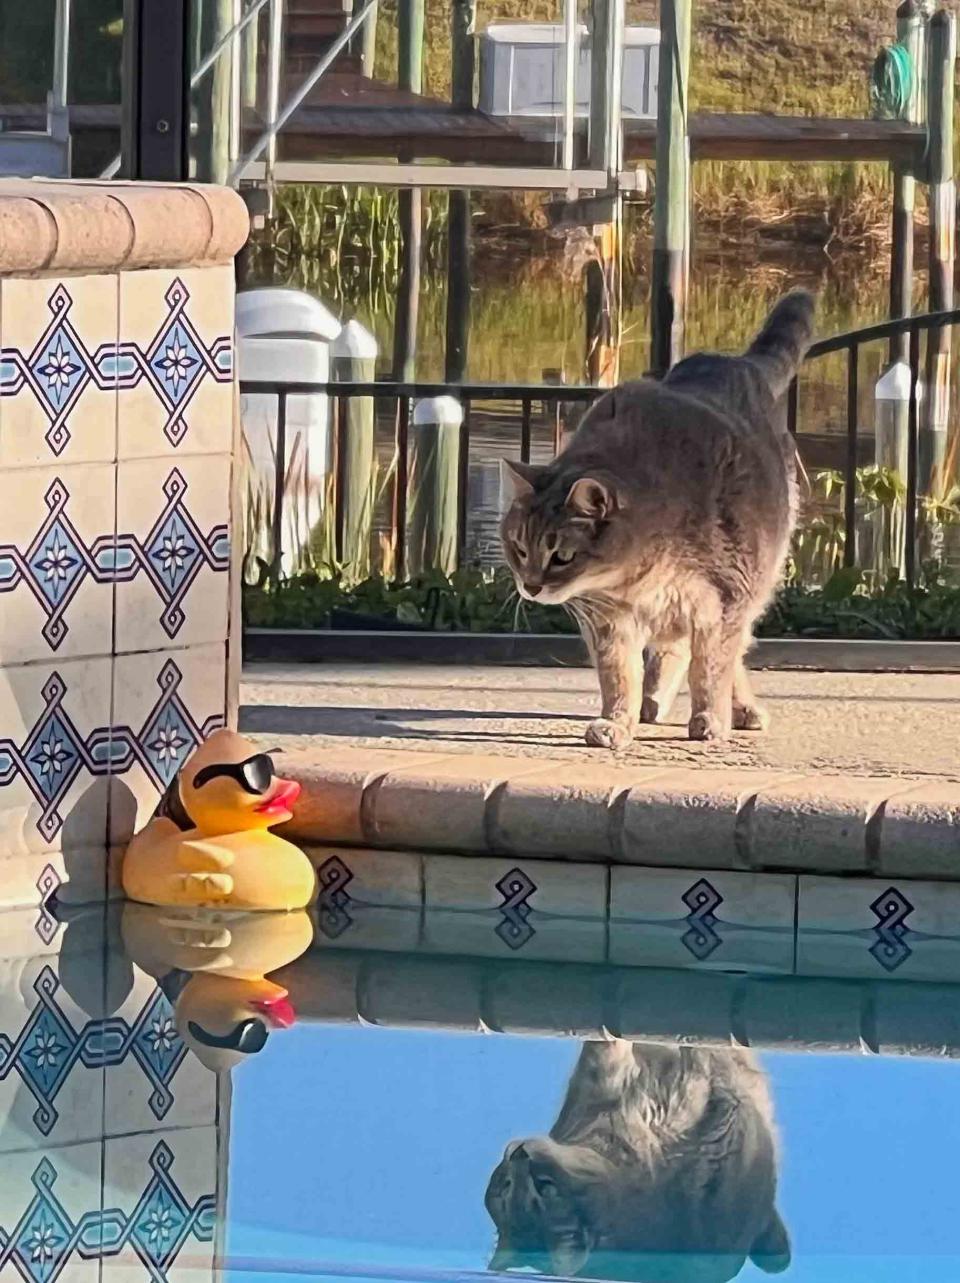 A cat looks at a rubber duck floating in a pond